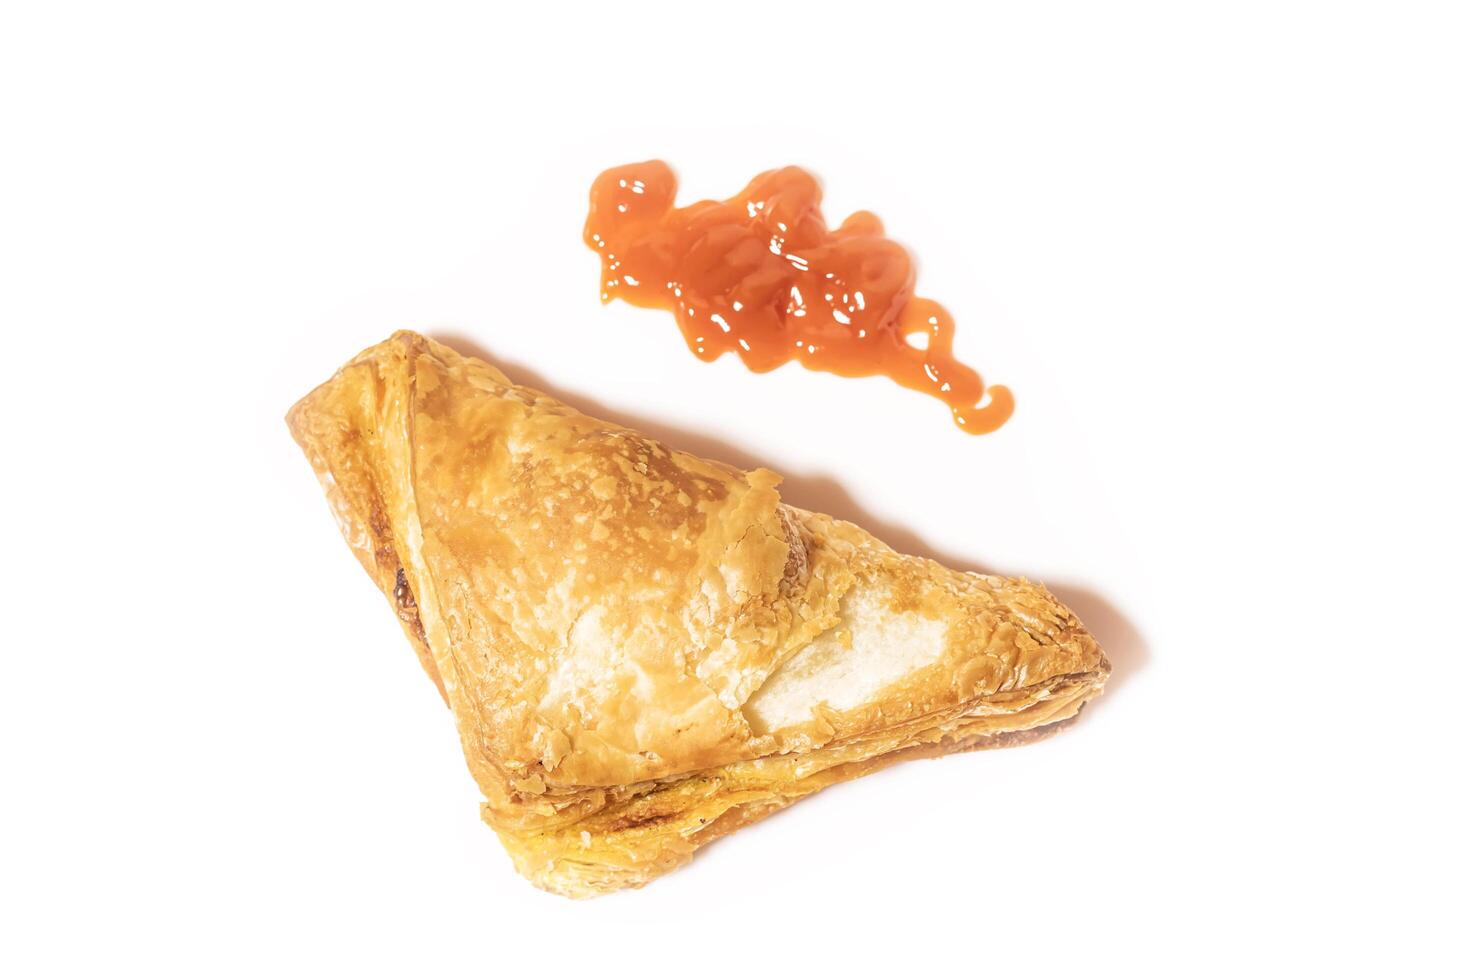 Veg Puff Pastry with tomato sauce isolated on a white background. Top view photo